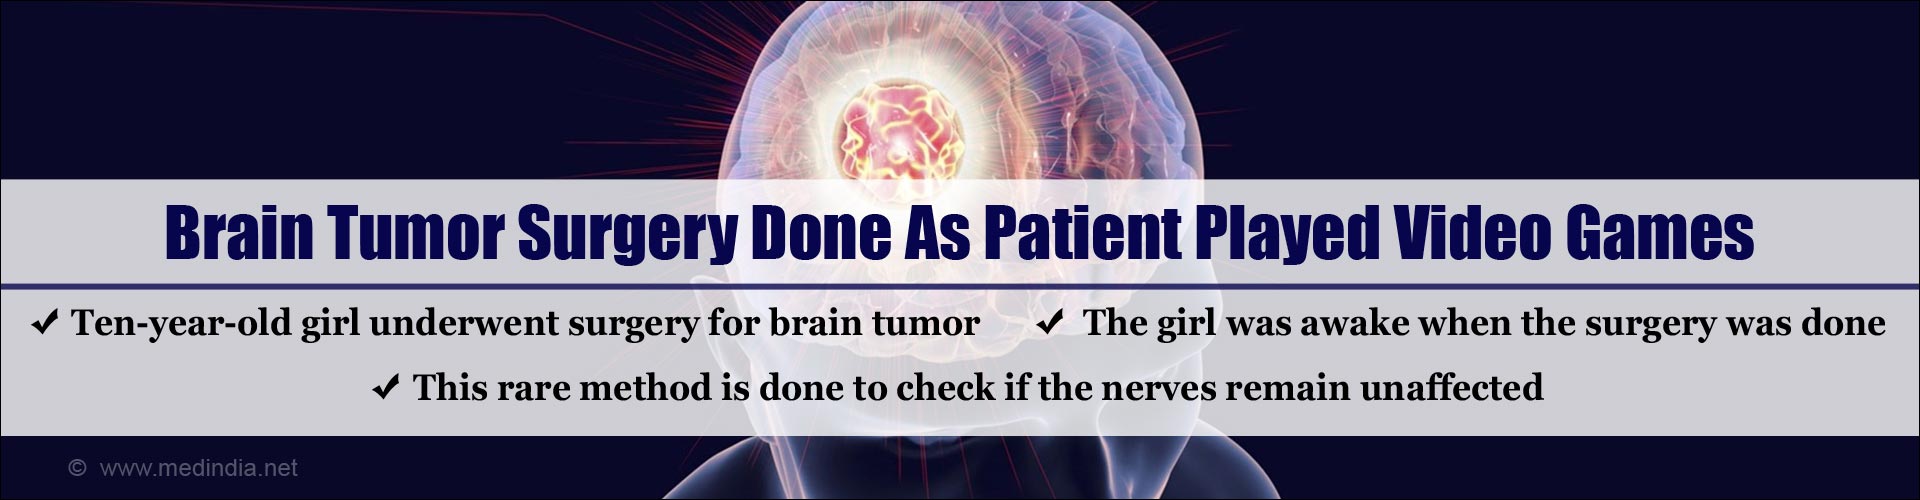 Brain tumor surgery done as patient played video video games
- Ten-year-old girl underwent surgery for brain tumor
- the girl was awake when the surgery was done
- The rare method is done to check if the nerves remain unaffected